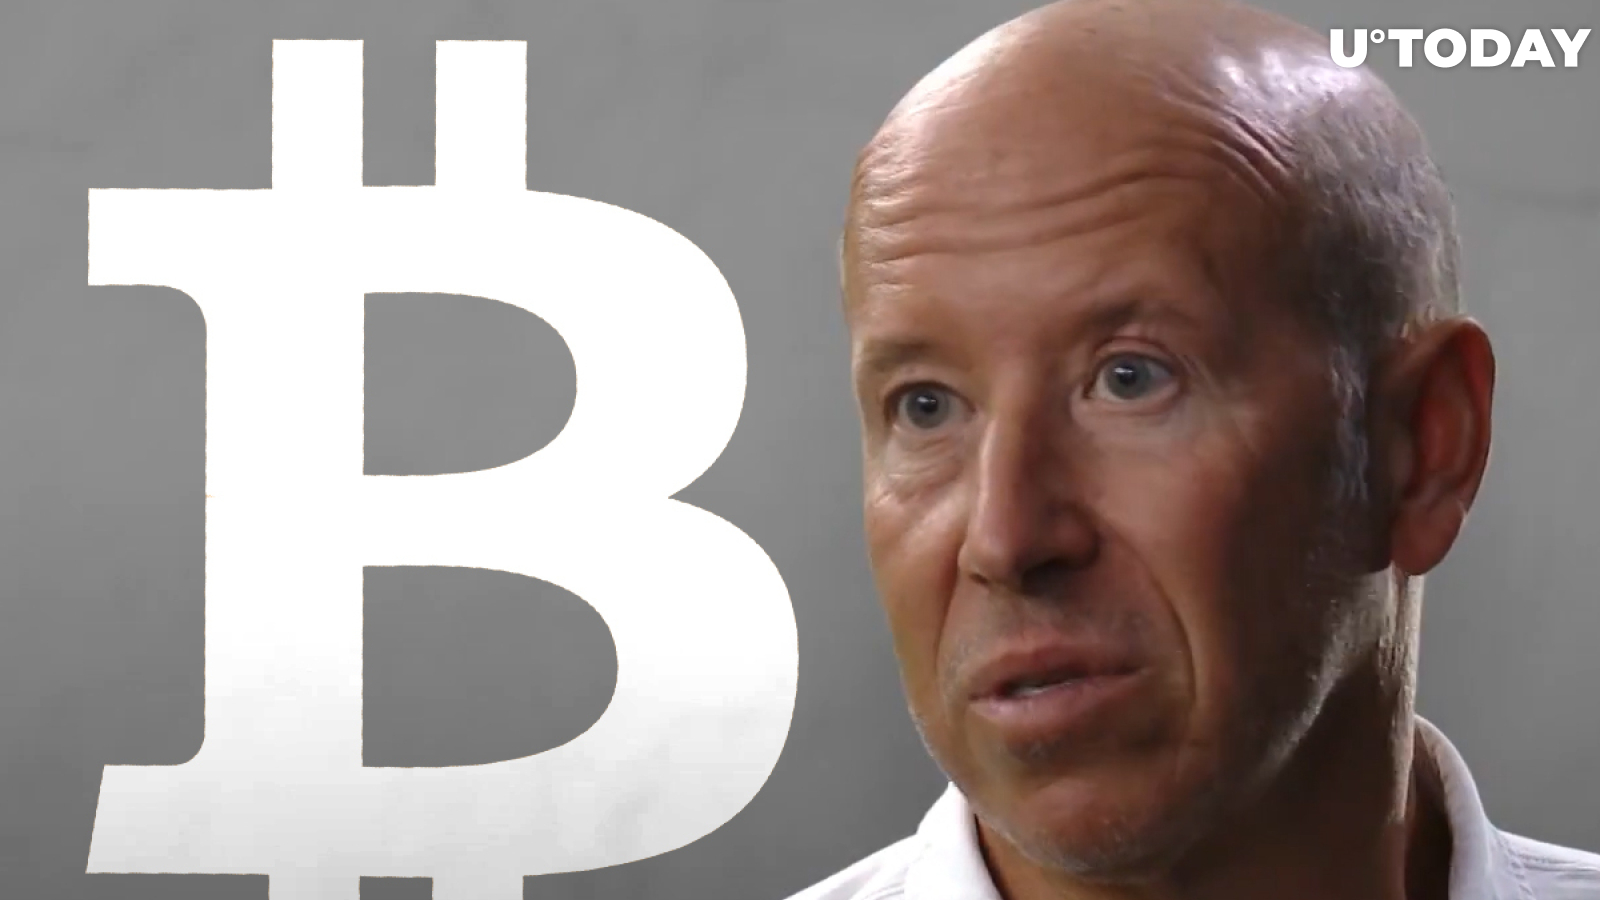 Bitcoin Has No Real Purpose but Store of Value, BTC Holder Billionaire Barry Sternlicht Says